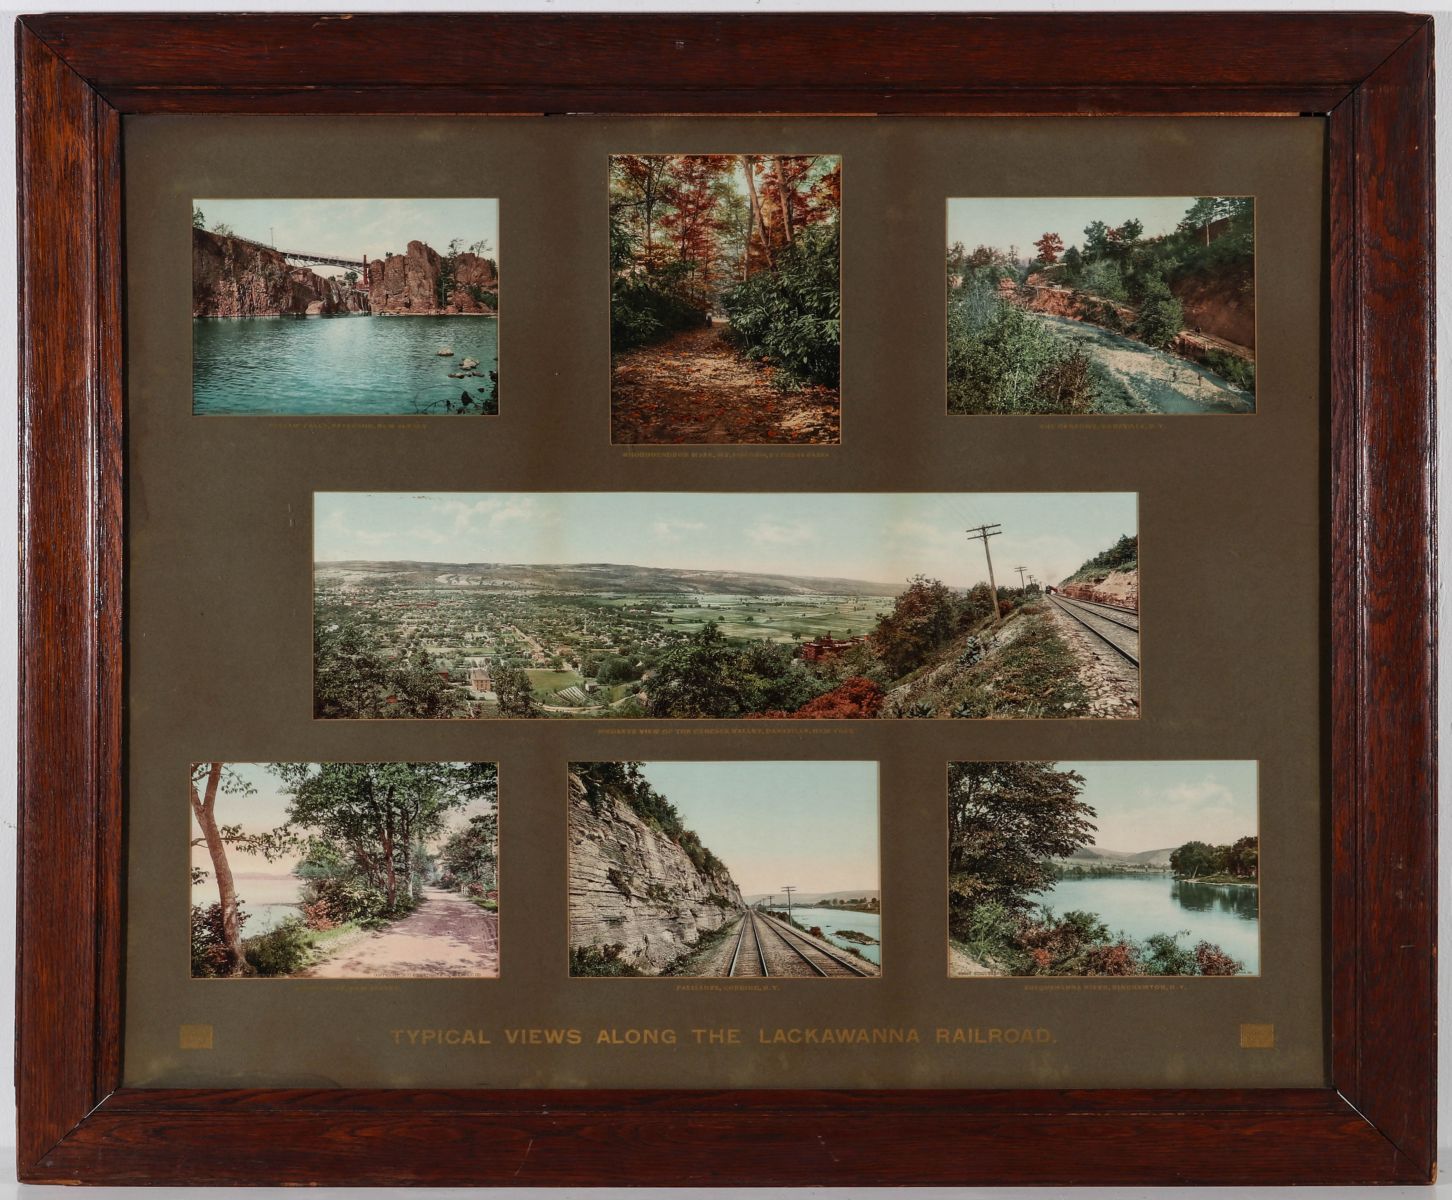 A FRAMED SUITE OF SEVEN VIEWS ON THE LACKAWANNA RR 1902